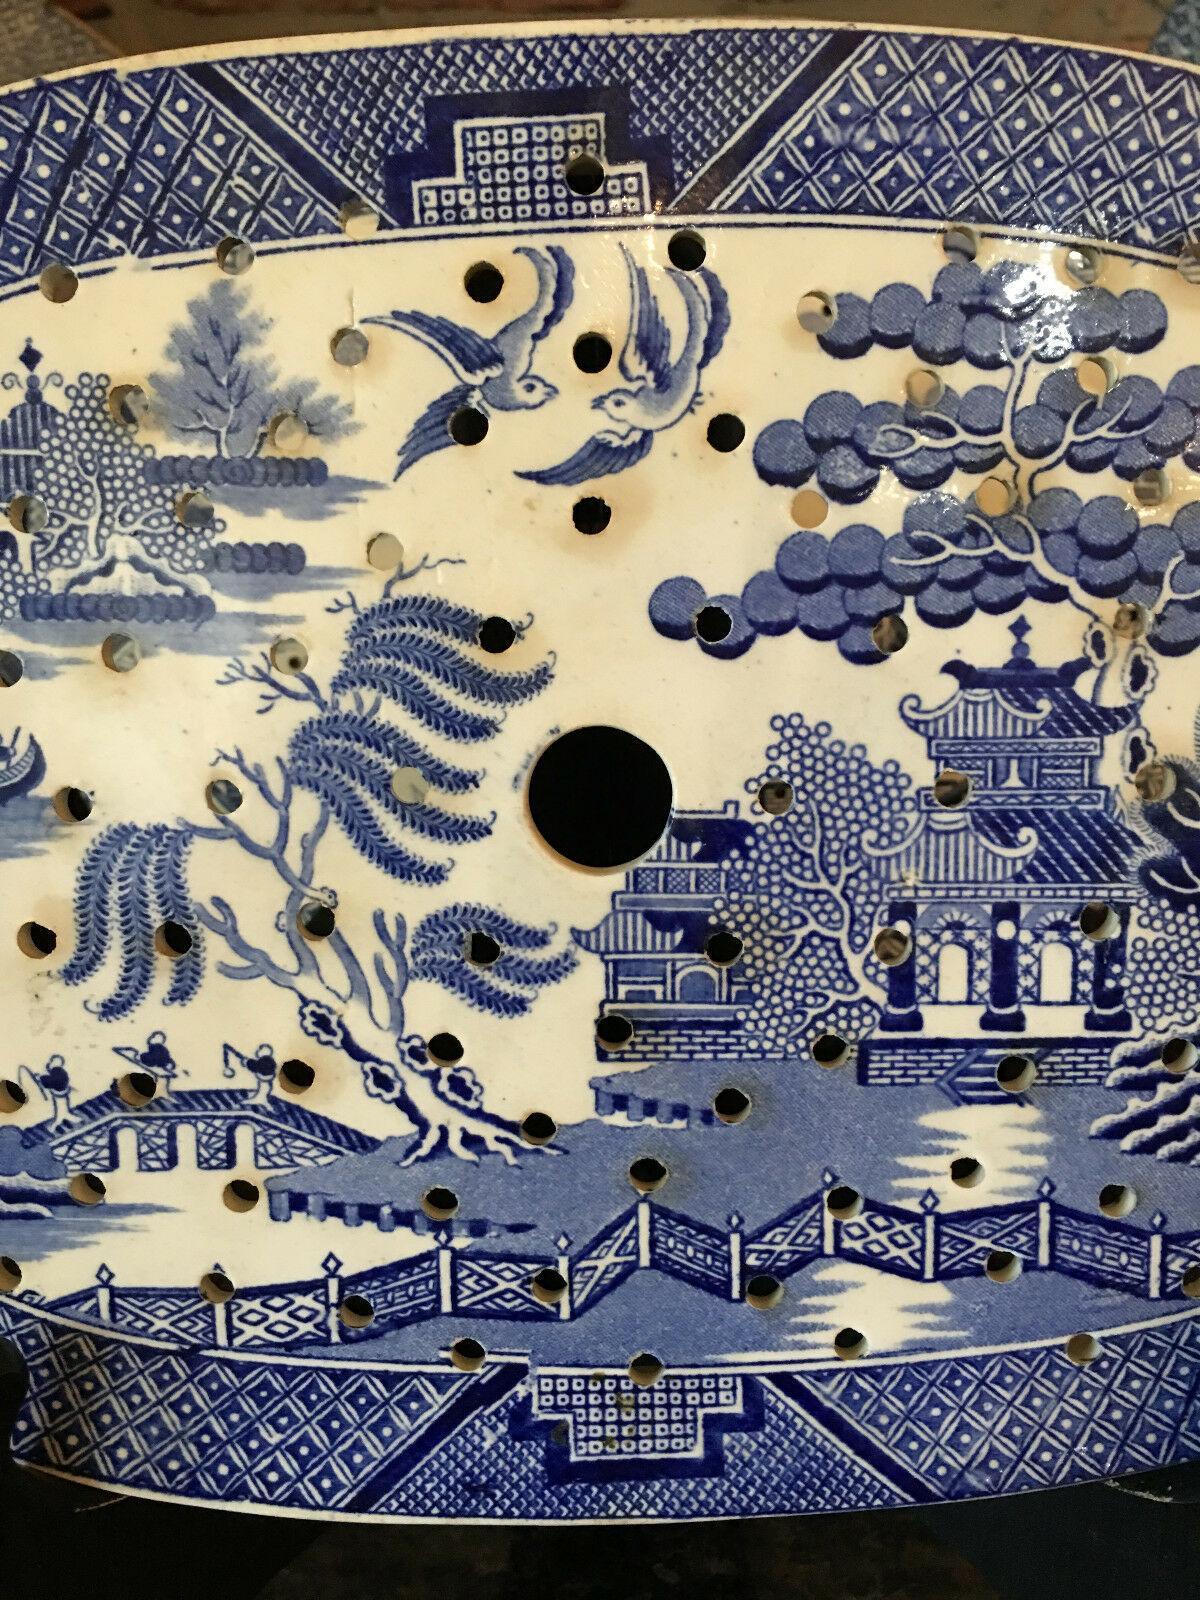 Glazed Antique English Meat Platter Drainer Blue Willow Transferware Oval Plateau #10